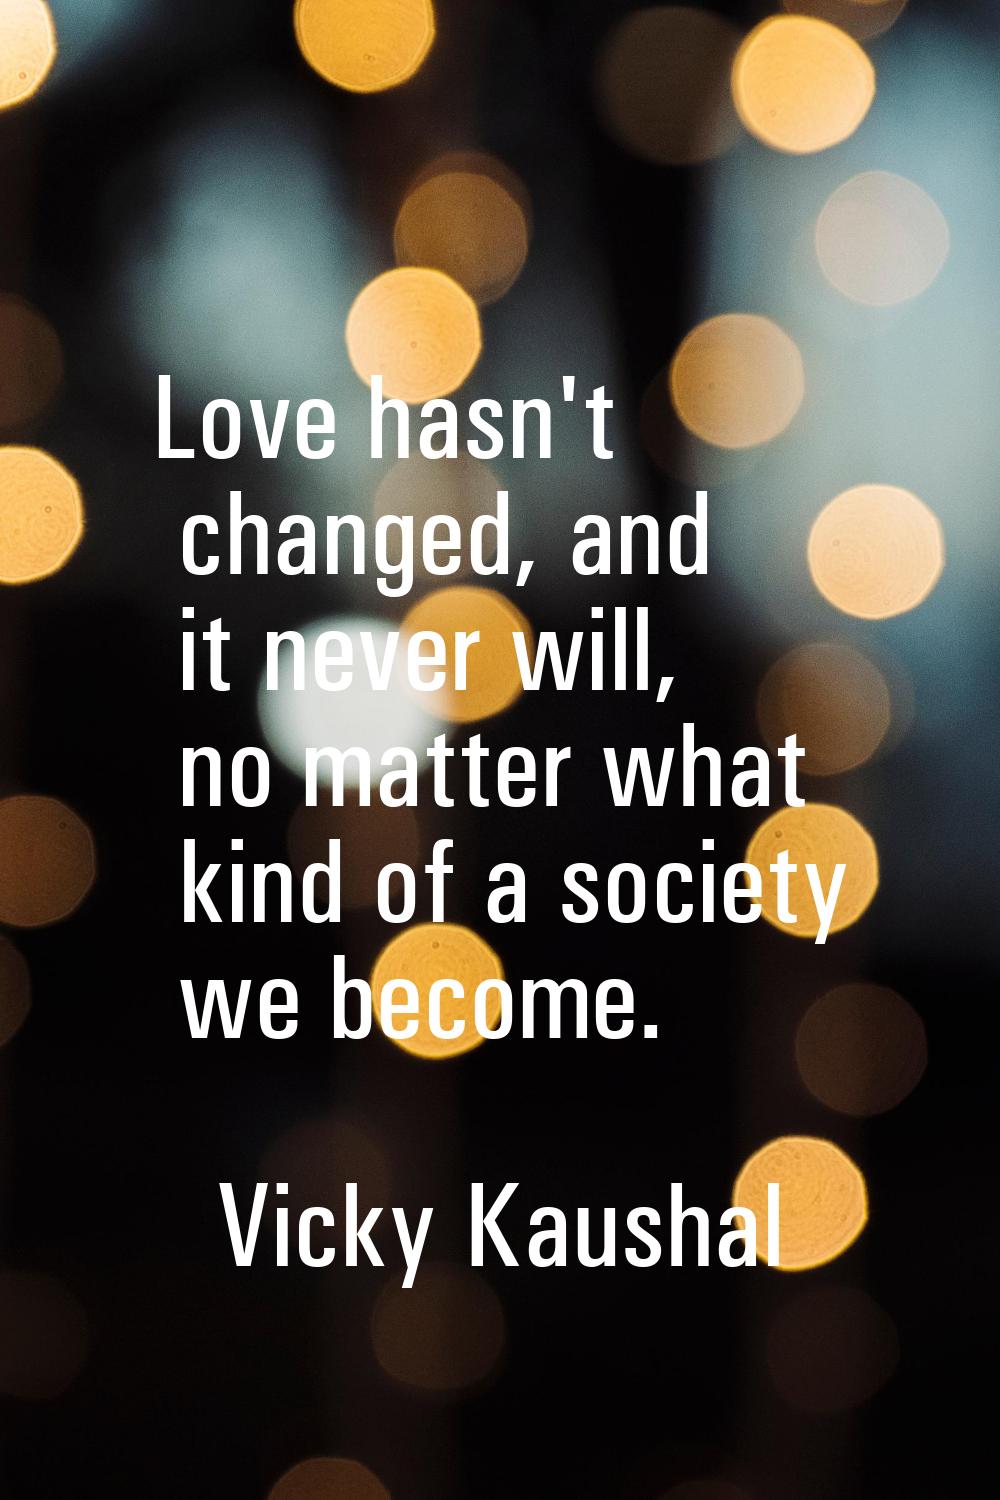 Love hasn't changed, and it never will, no matter what kind of a society we become.